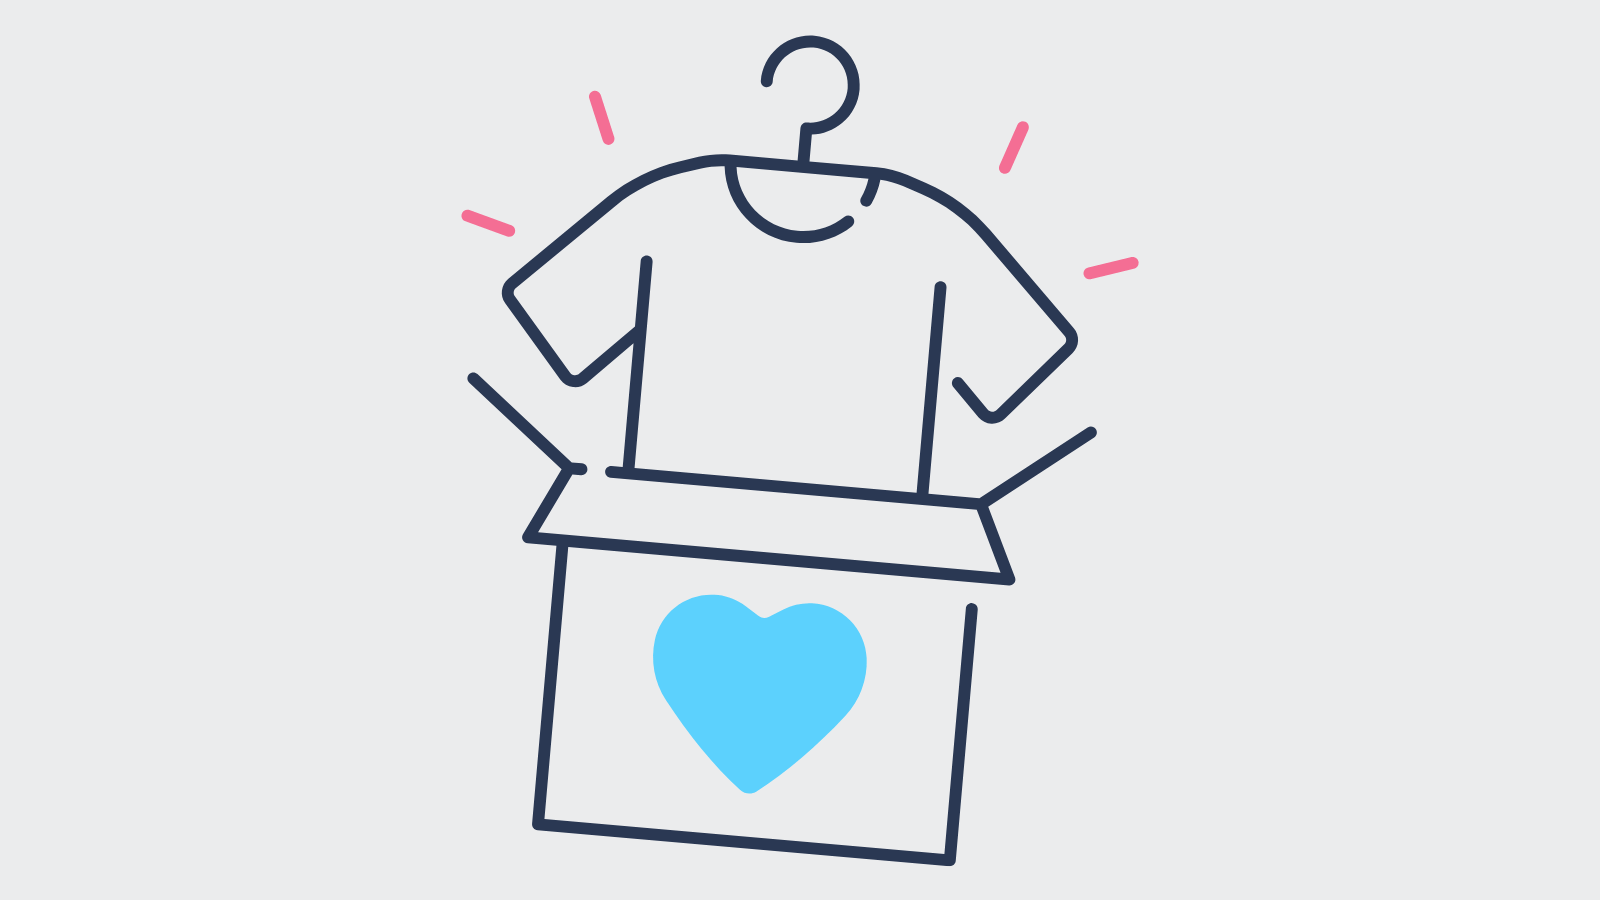 A T-shirt on a hanger bursting out of a box with a heart on the front